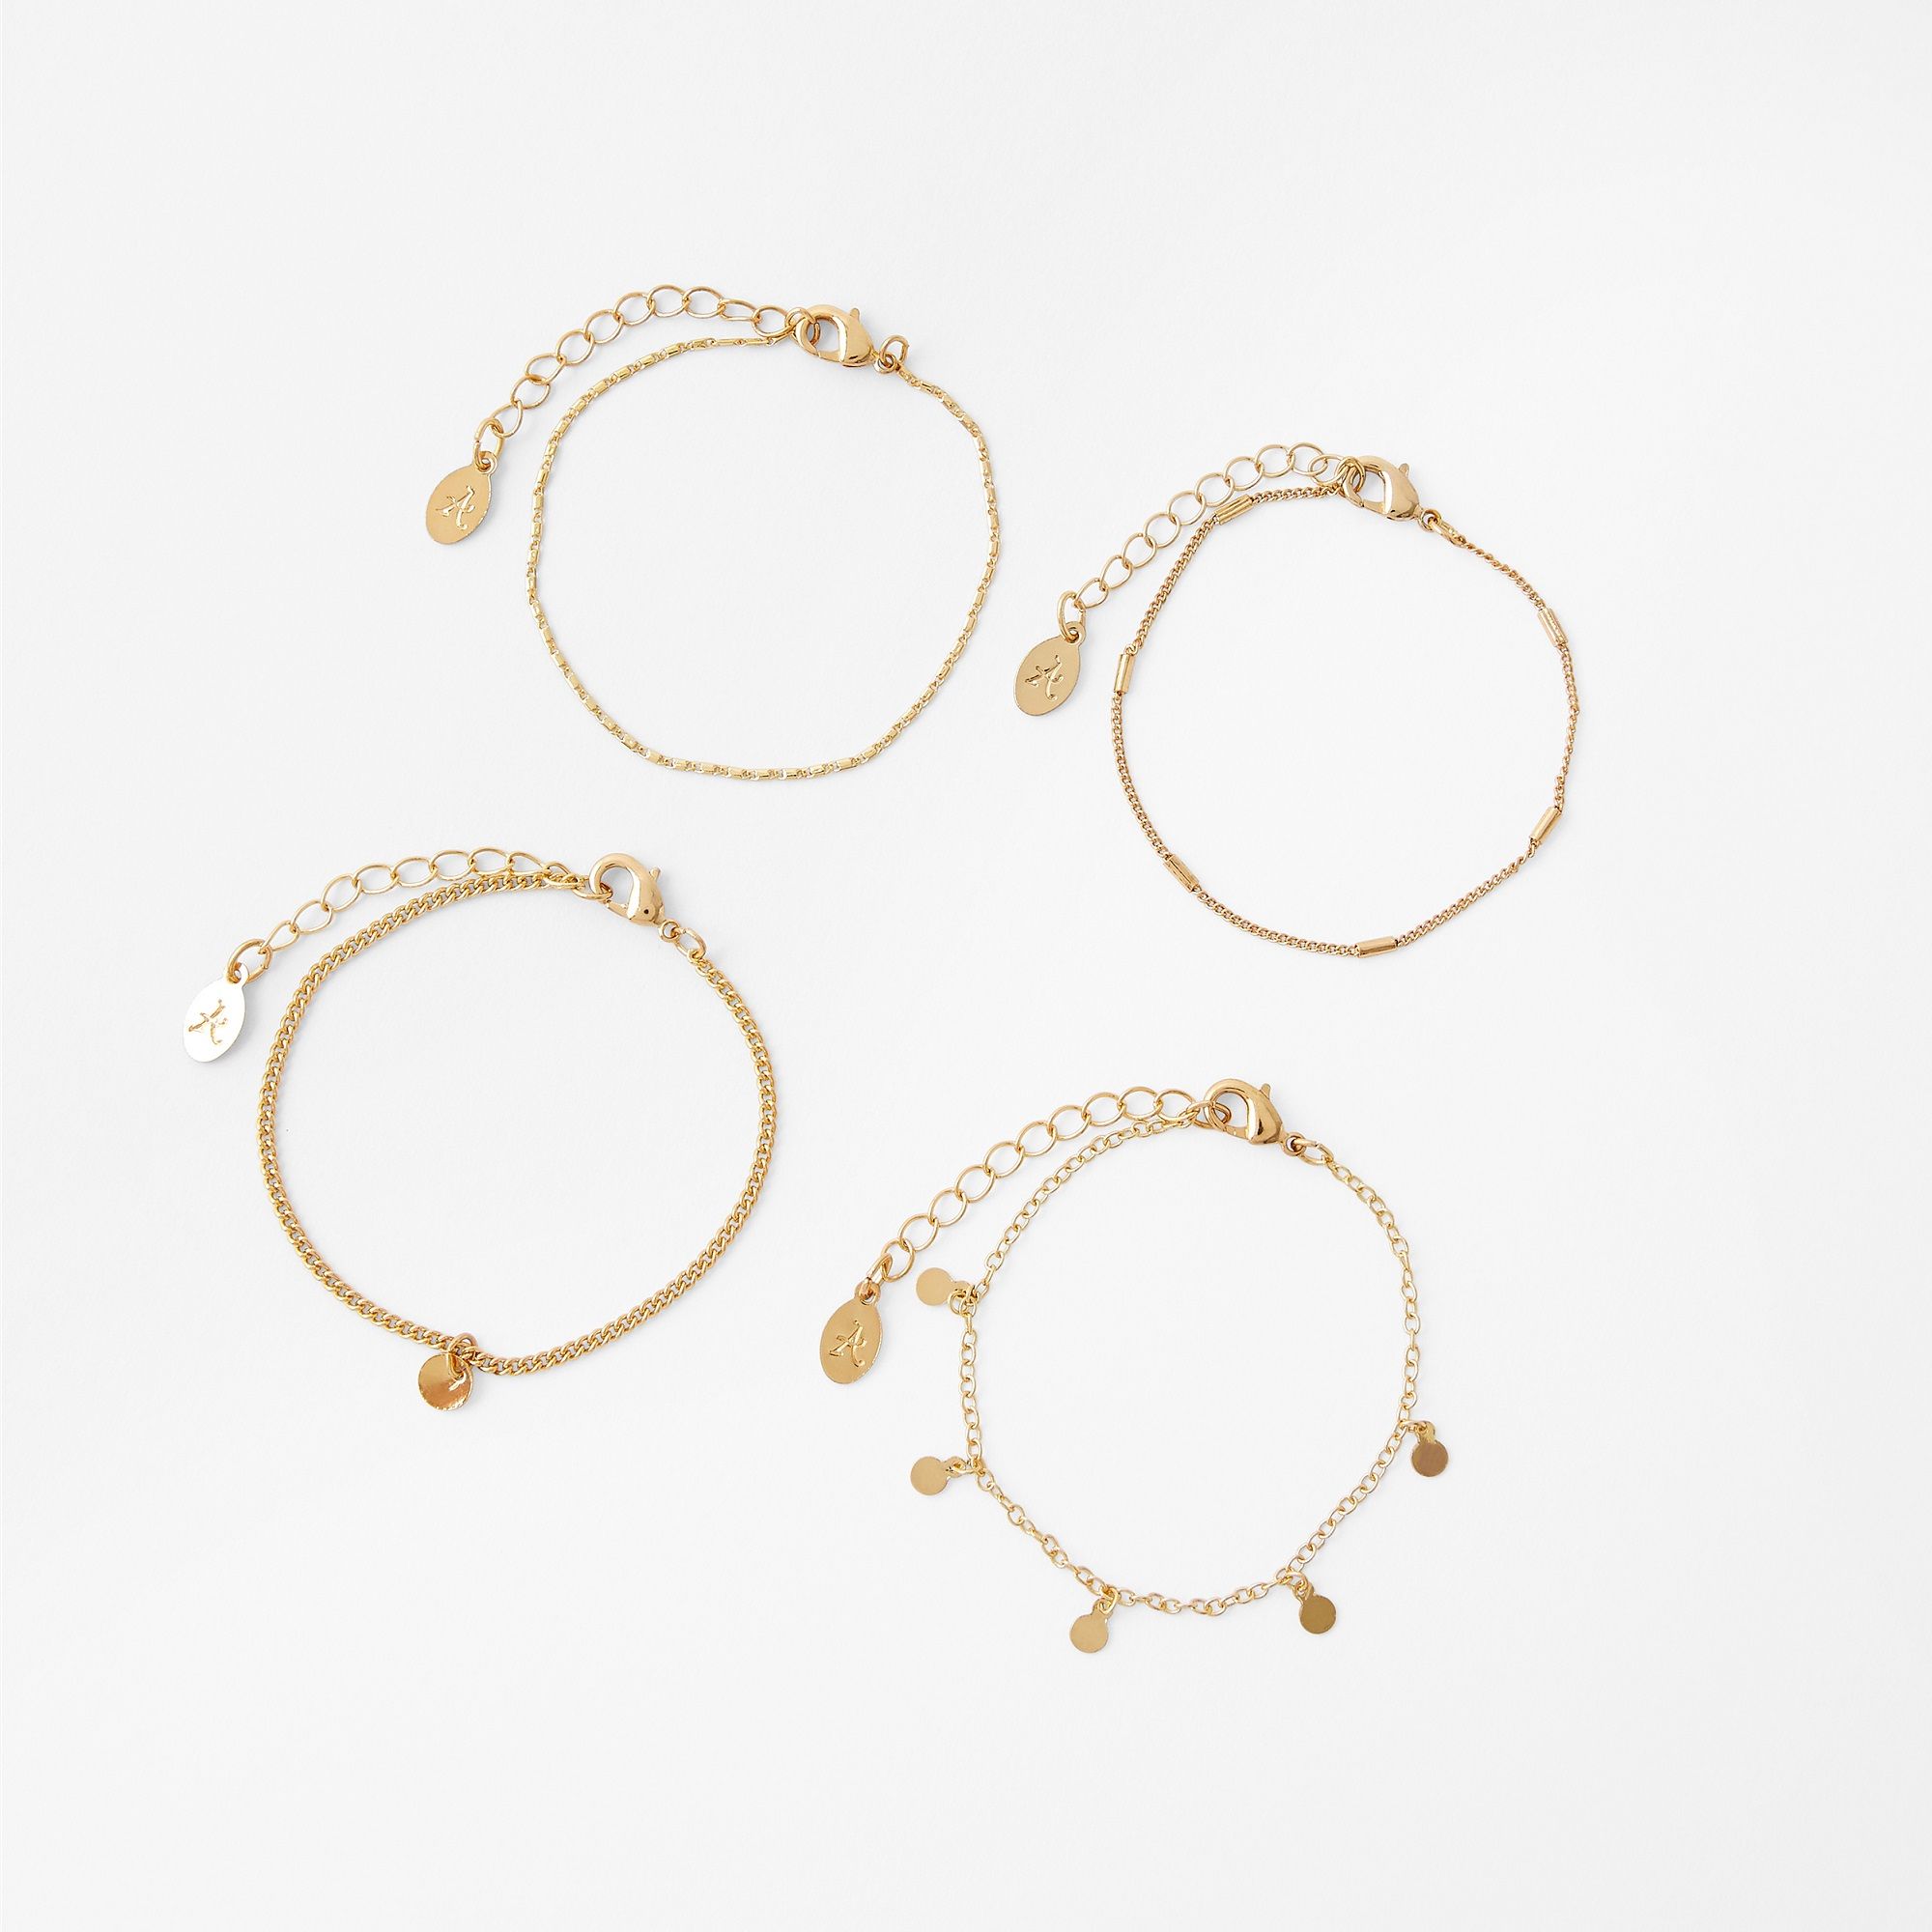 Accessorize London 4 X Simple Silver Bracelets Buy Accessorize London 4 X  Simple Silver Bracelets Online at Best Price in India  Nykaa